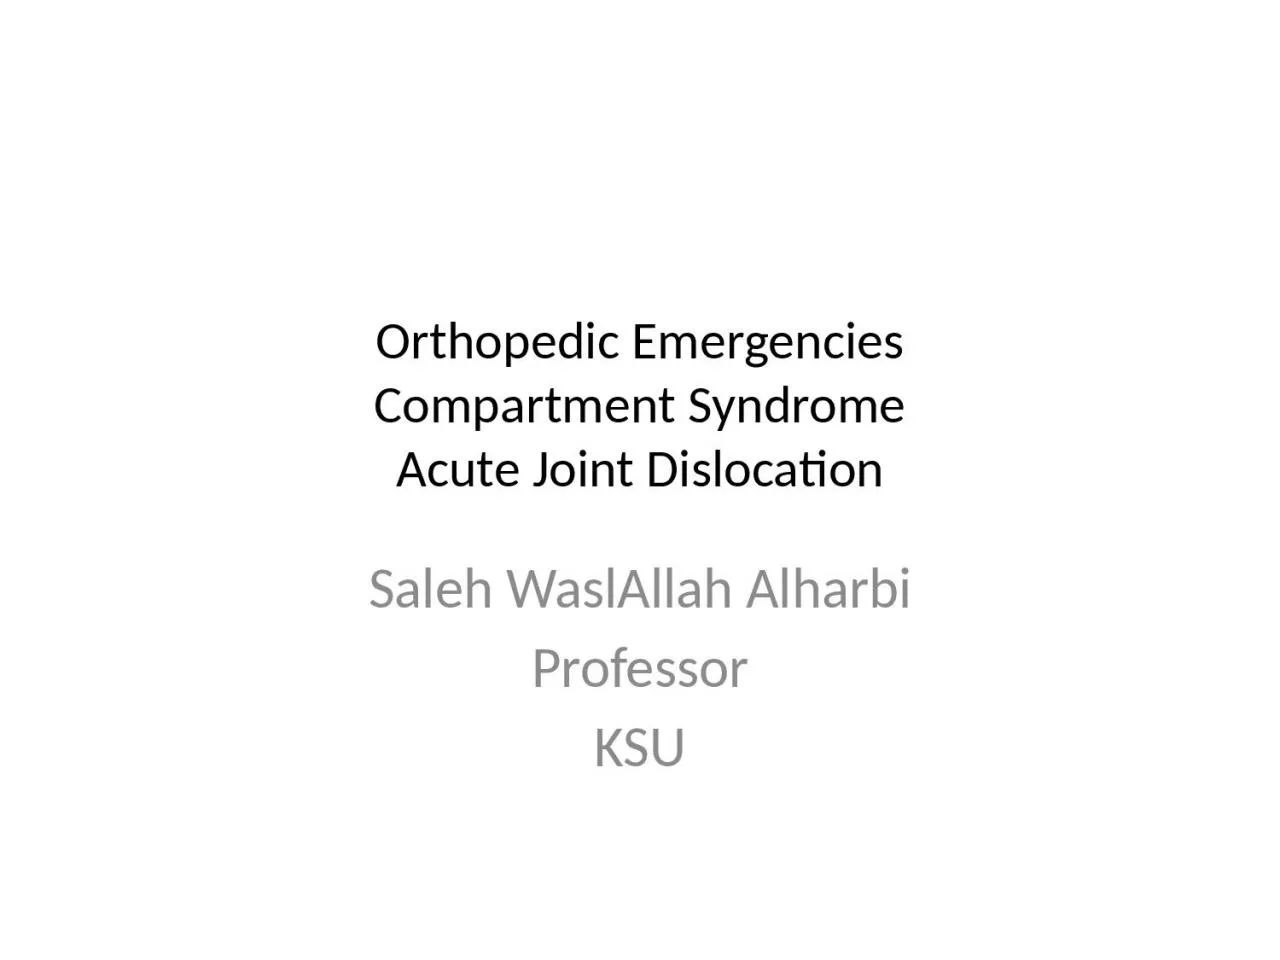 Orthopedic Emergencies Compartment Syndrome